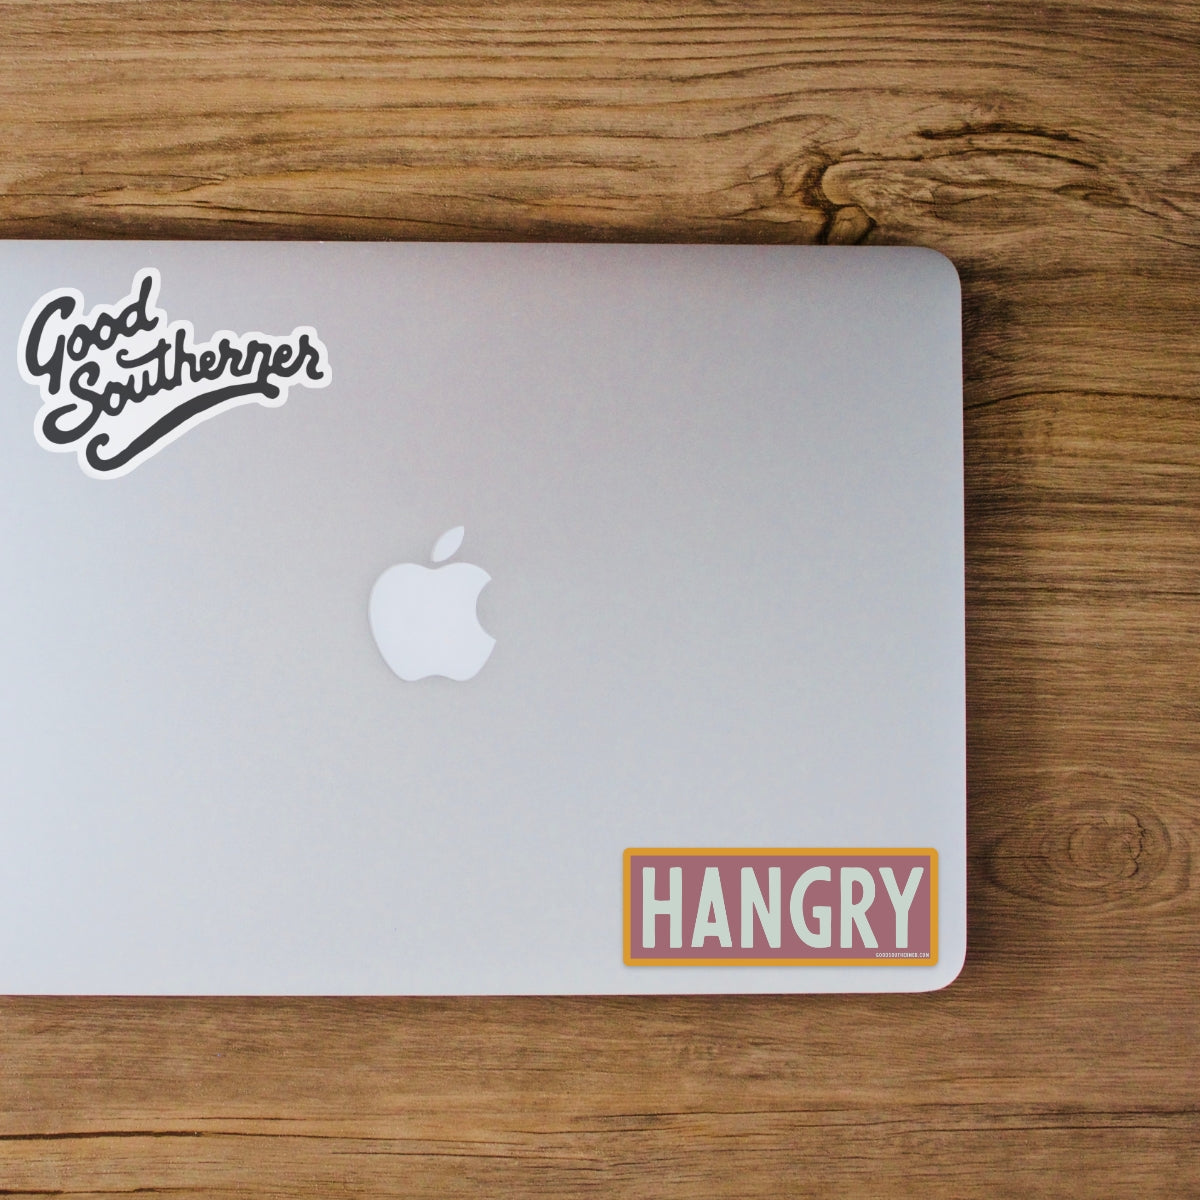 Good Southerner Hangry Sticker